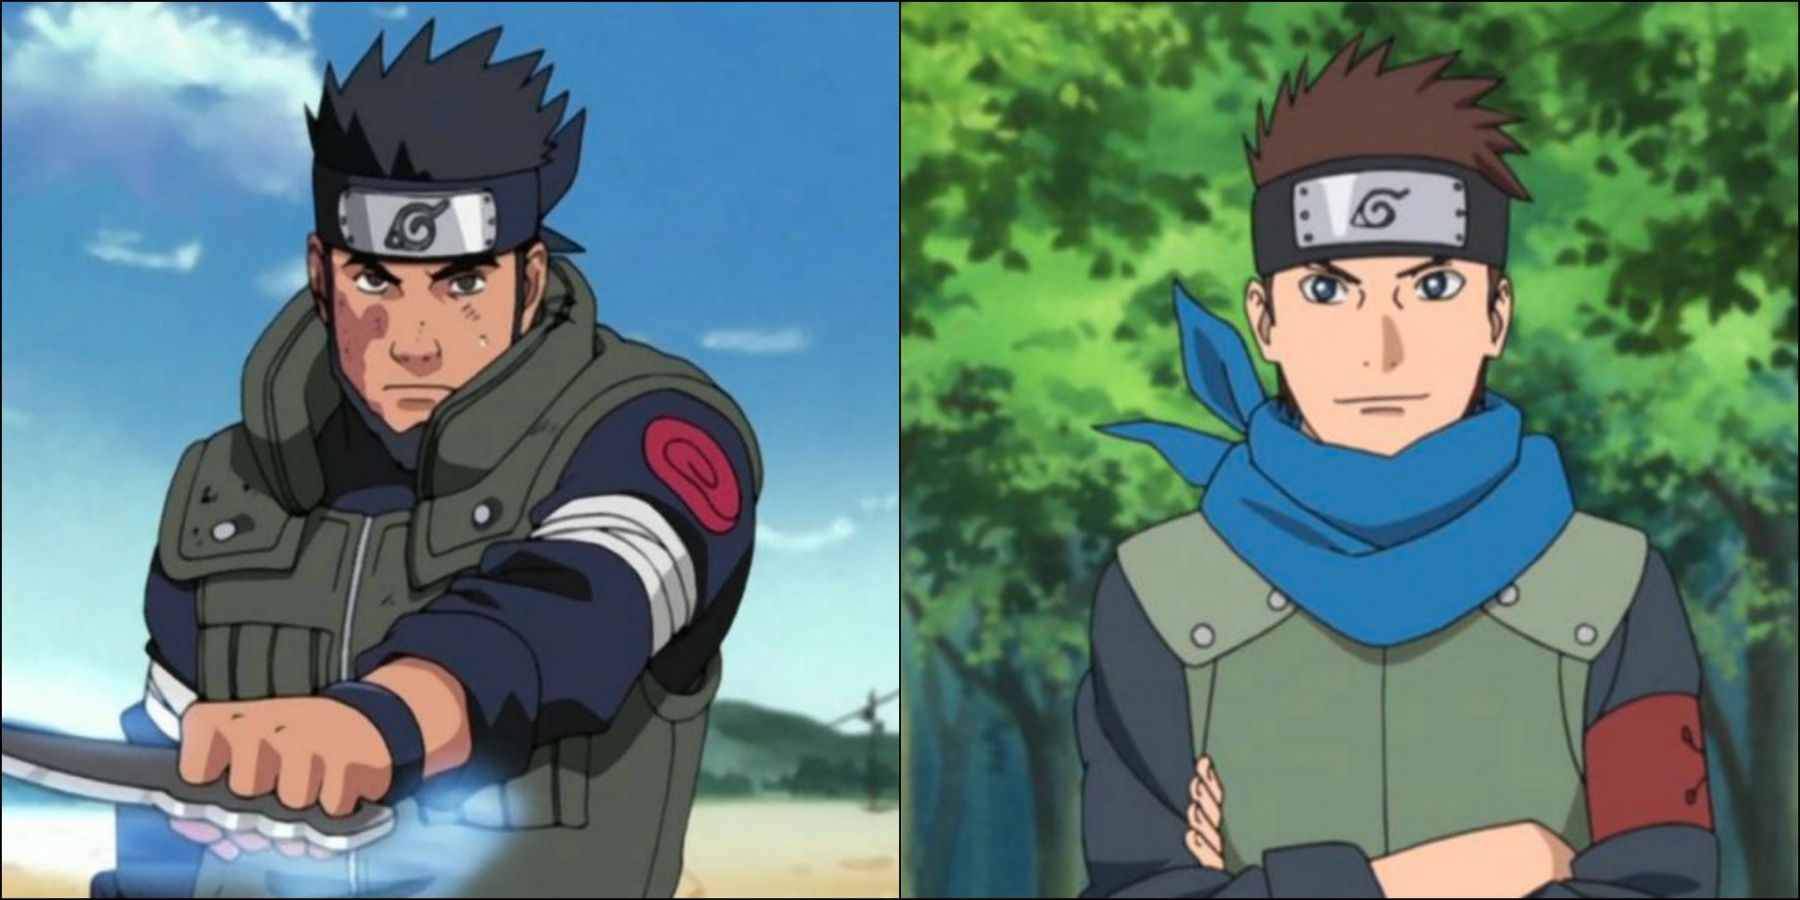 How strong is the average Jonin in Naruto? - Quora